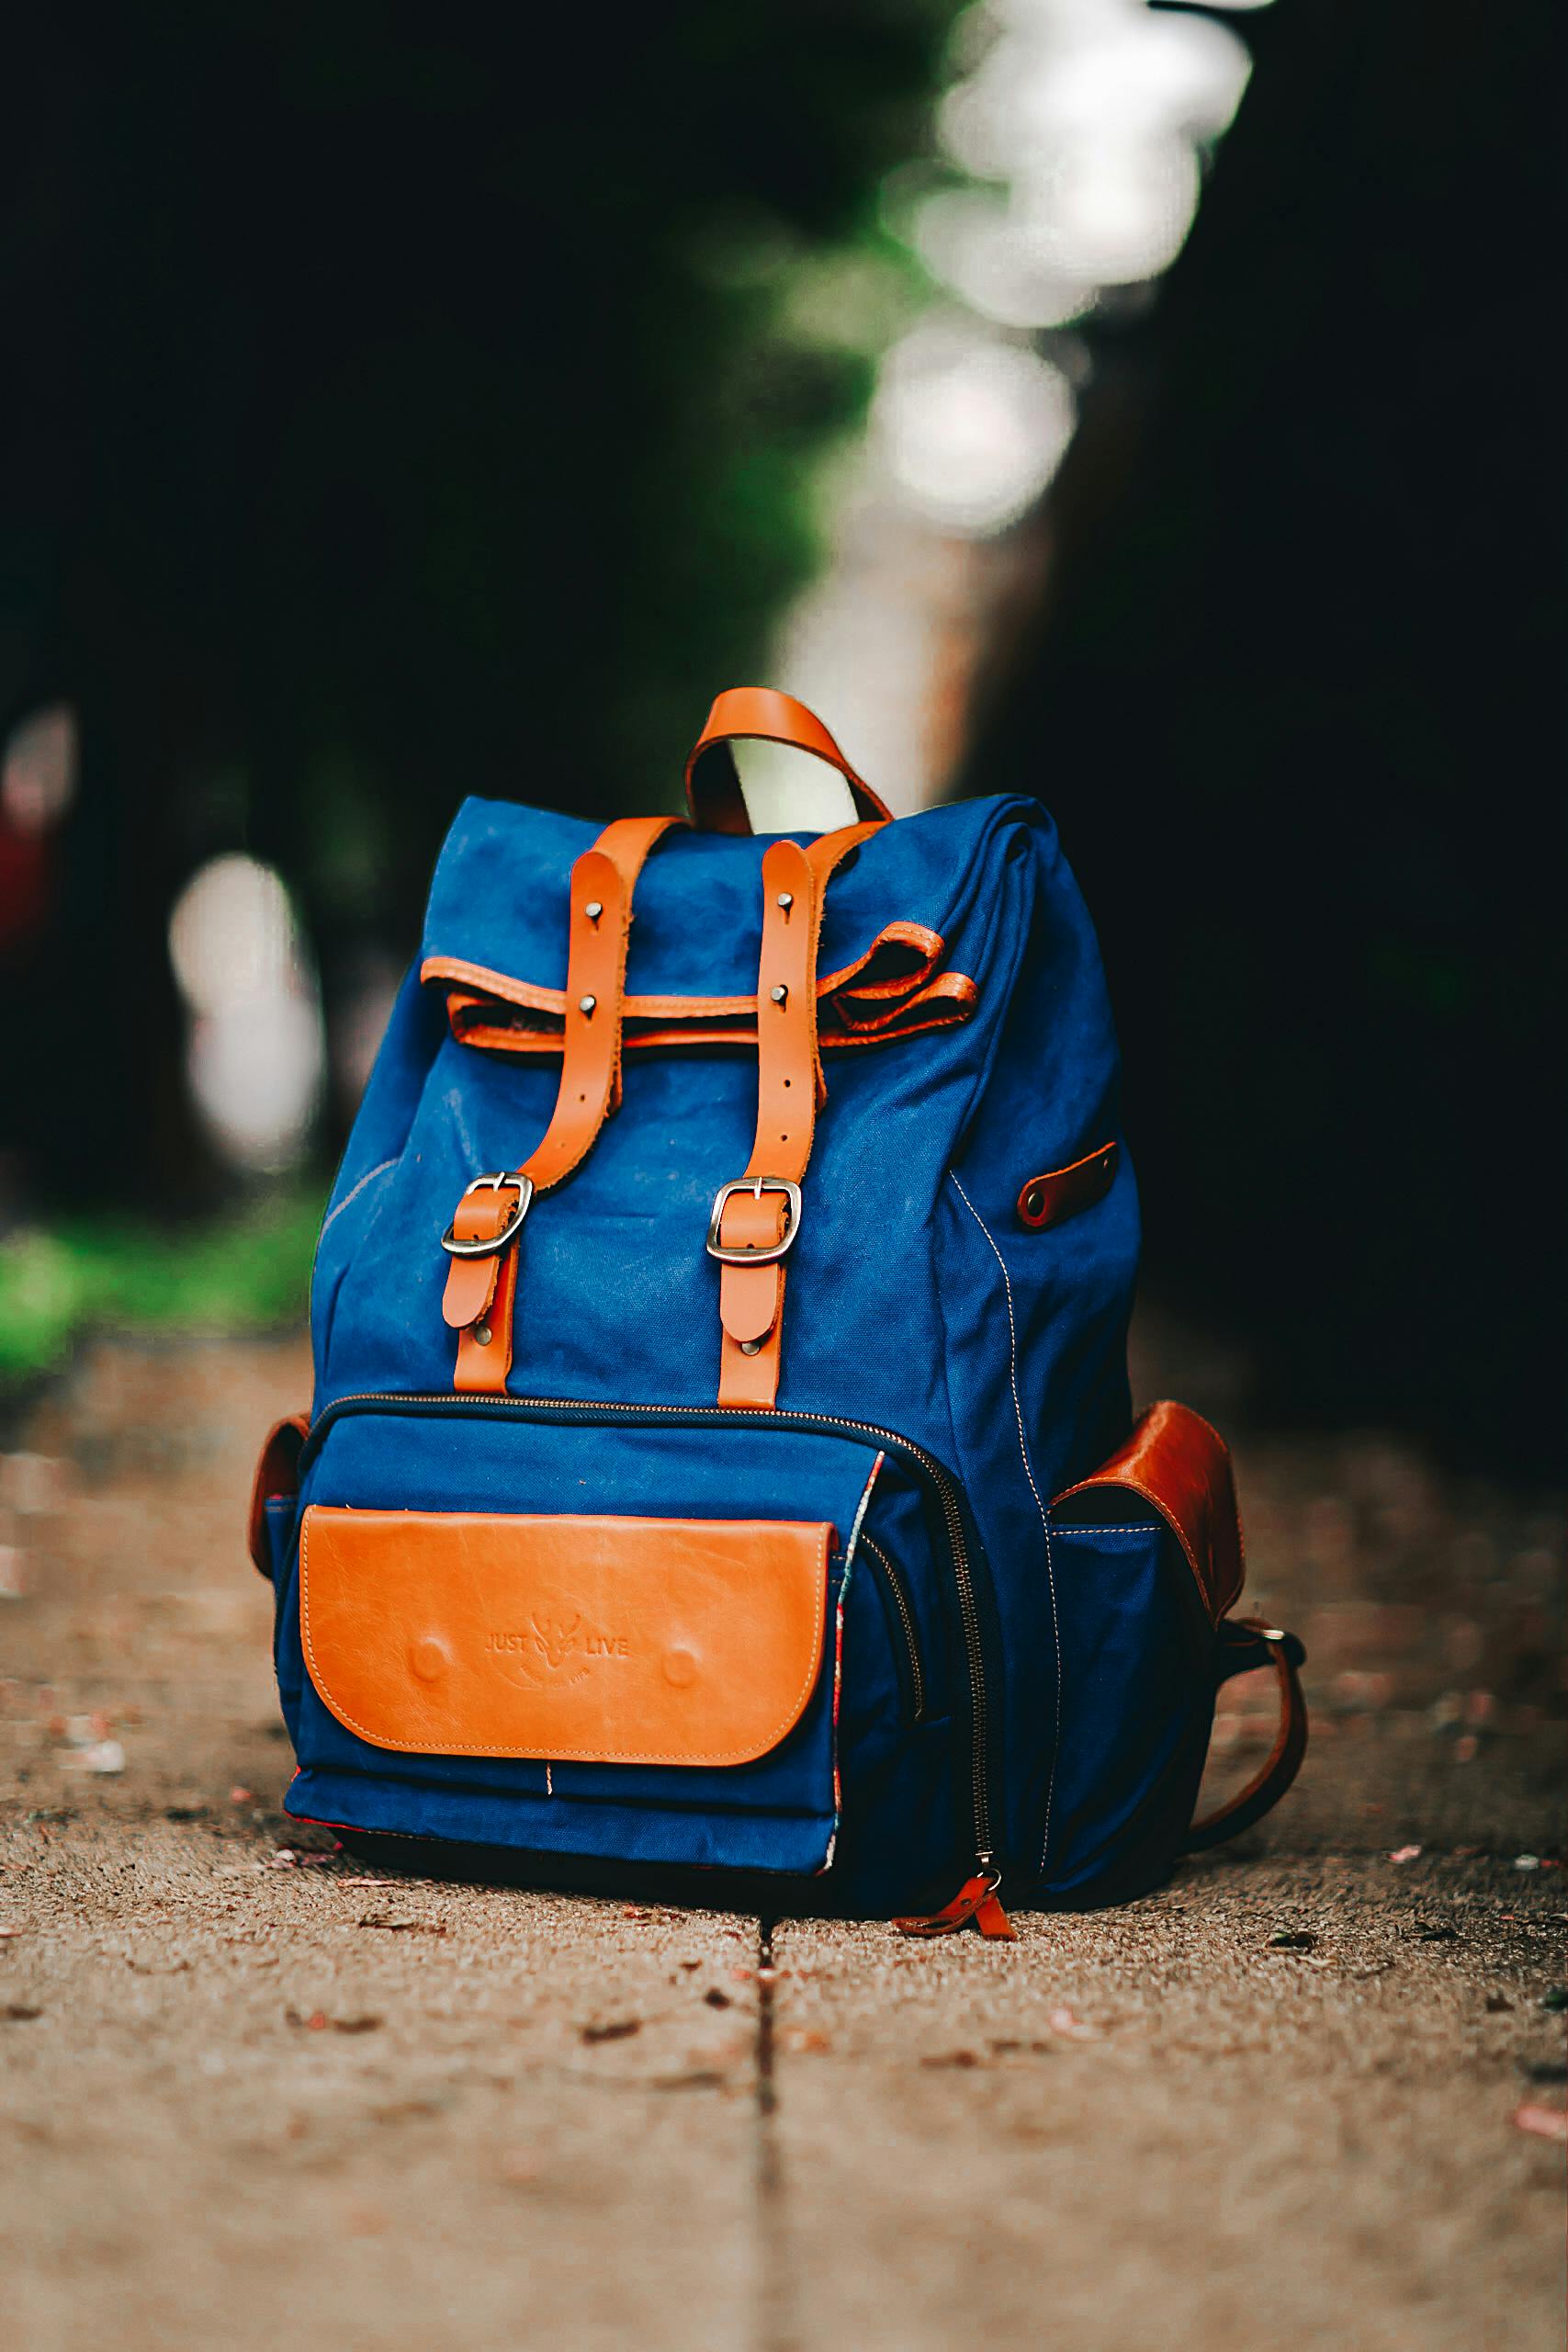 Download Male Bags hd photos | Free Stock Photos - Lovepik